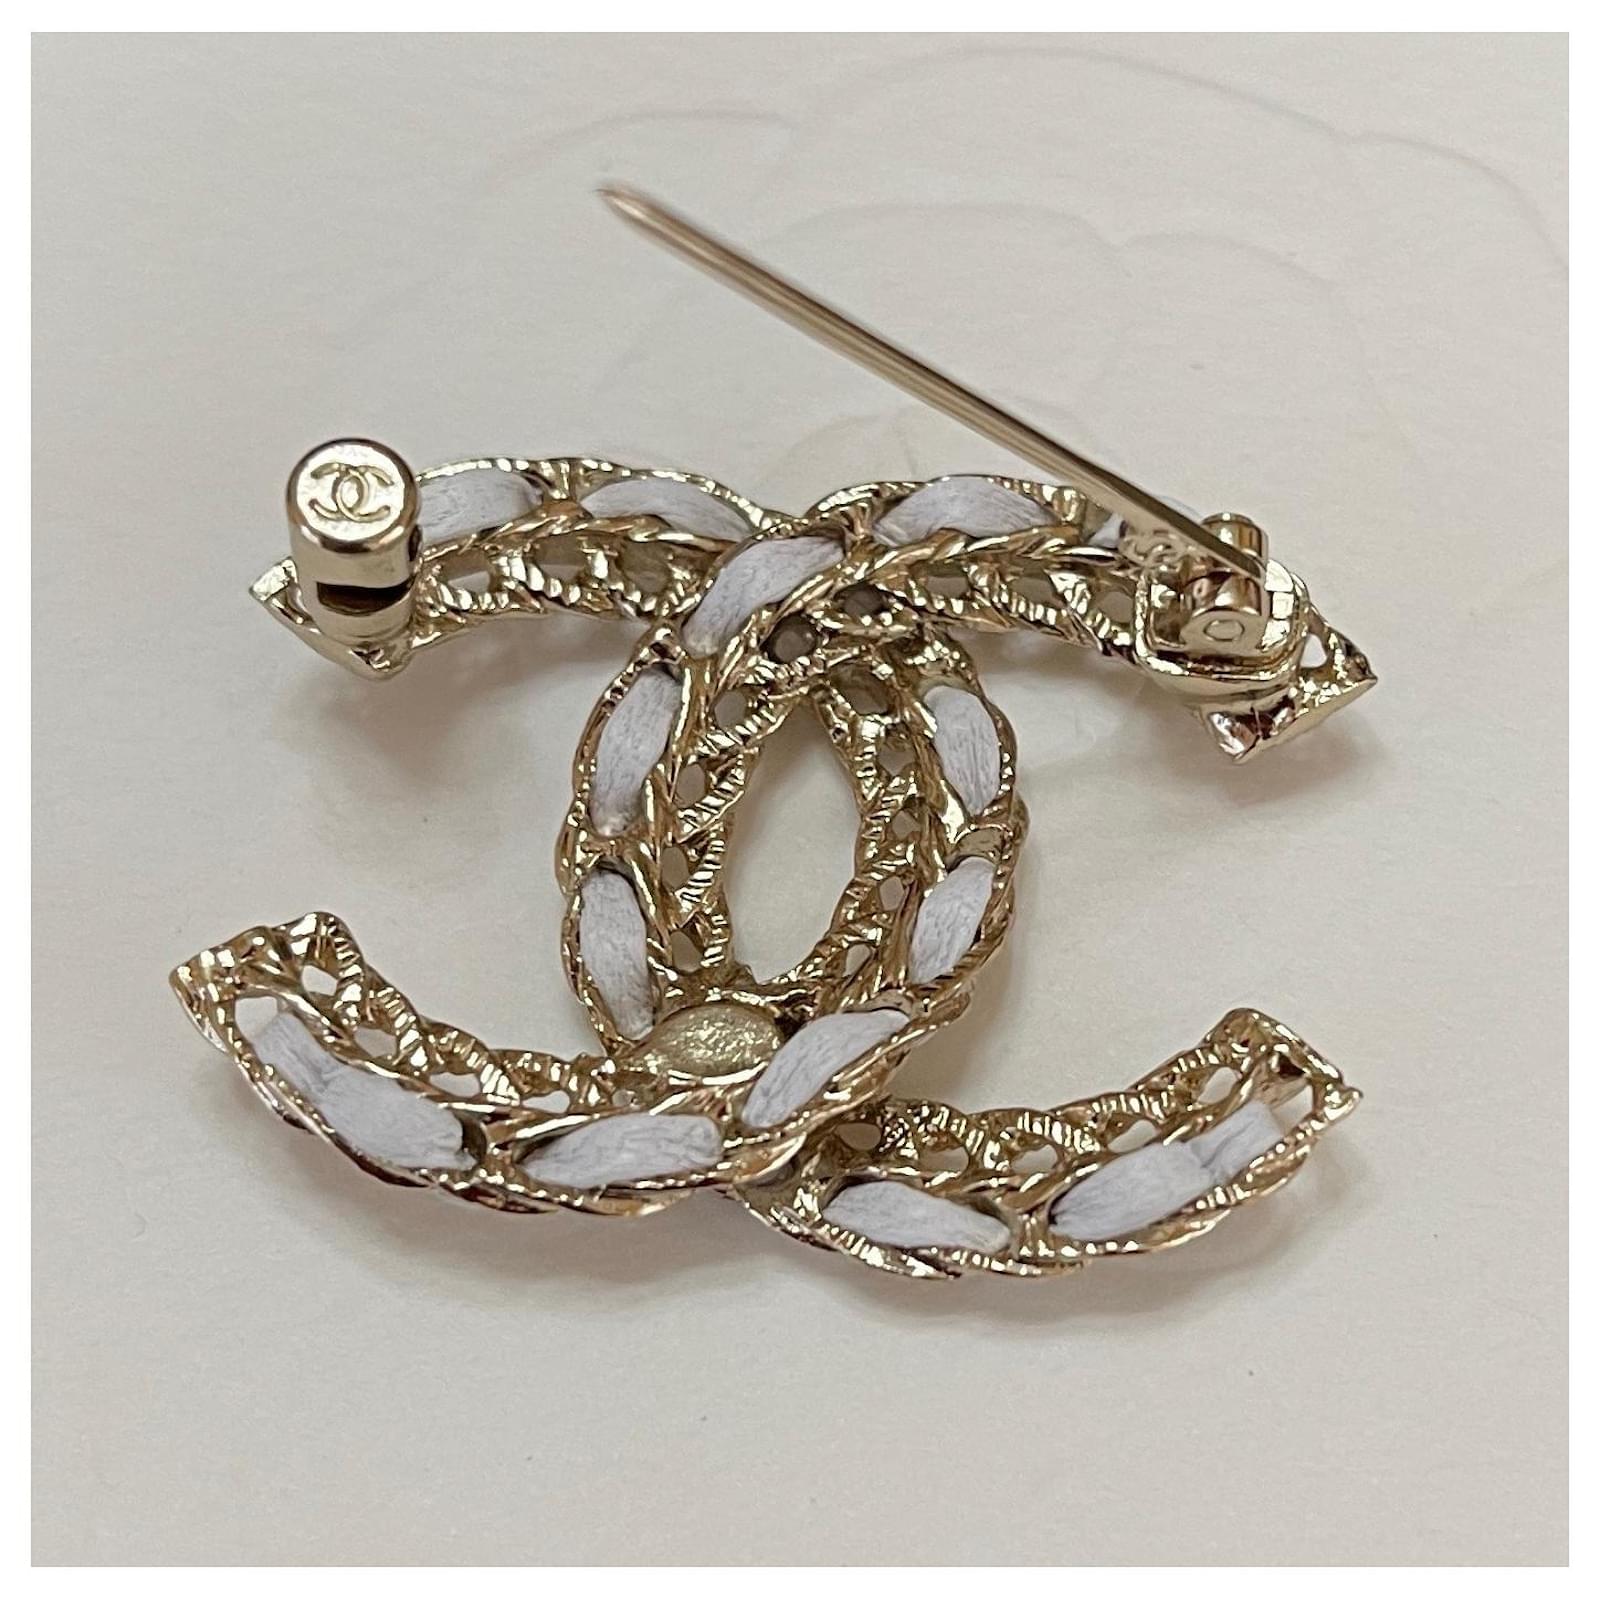 Vintage CHANEL golden turn lock CC pin brooch with crystals. Very